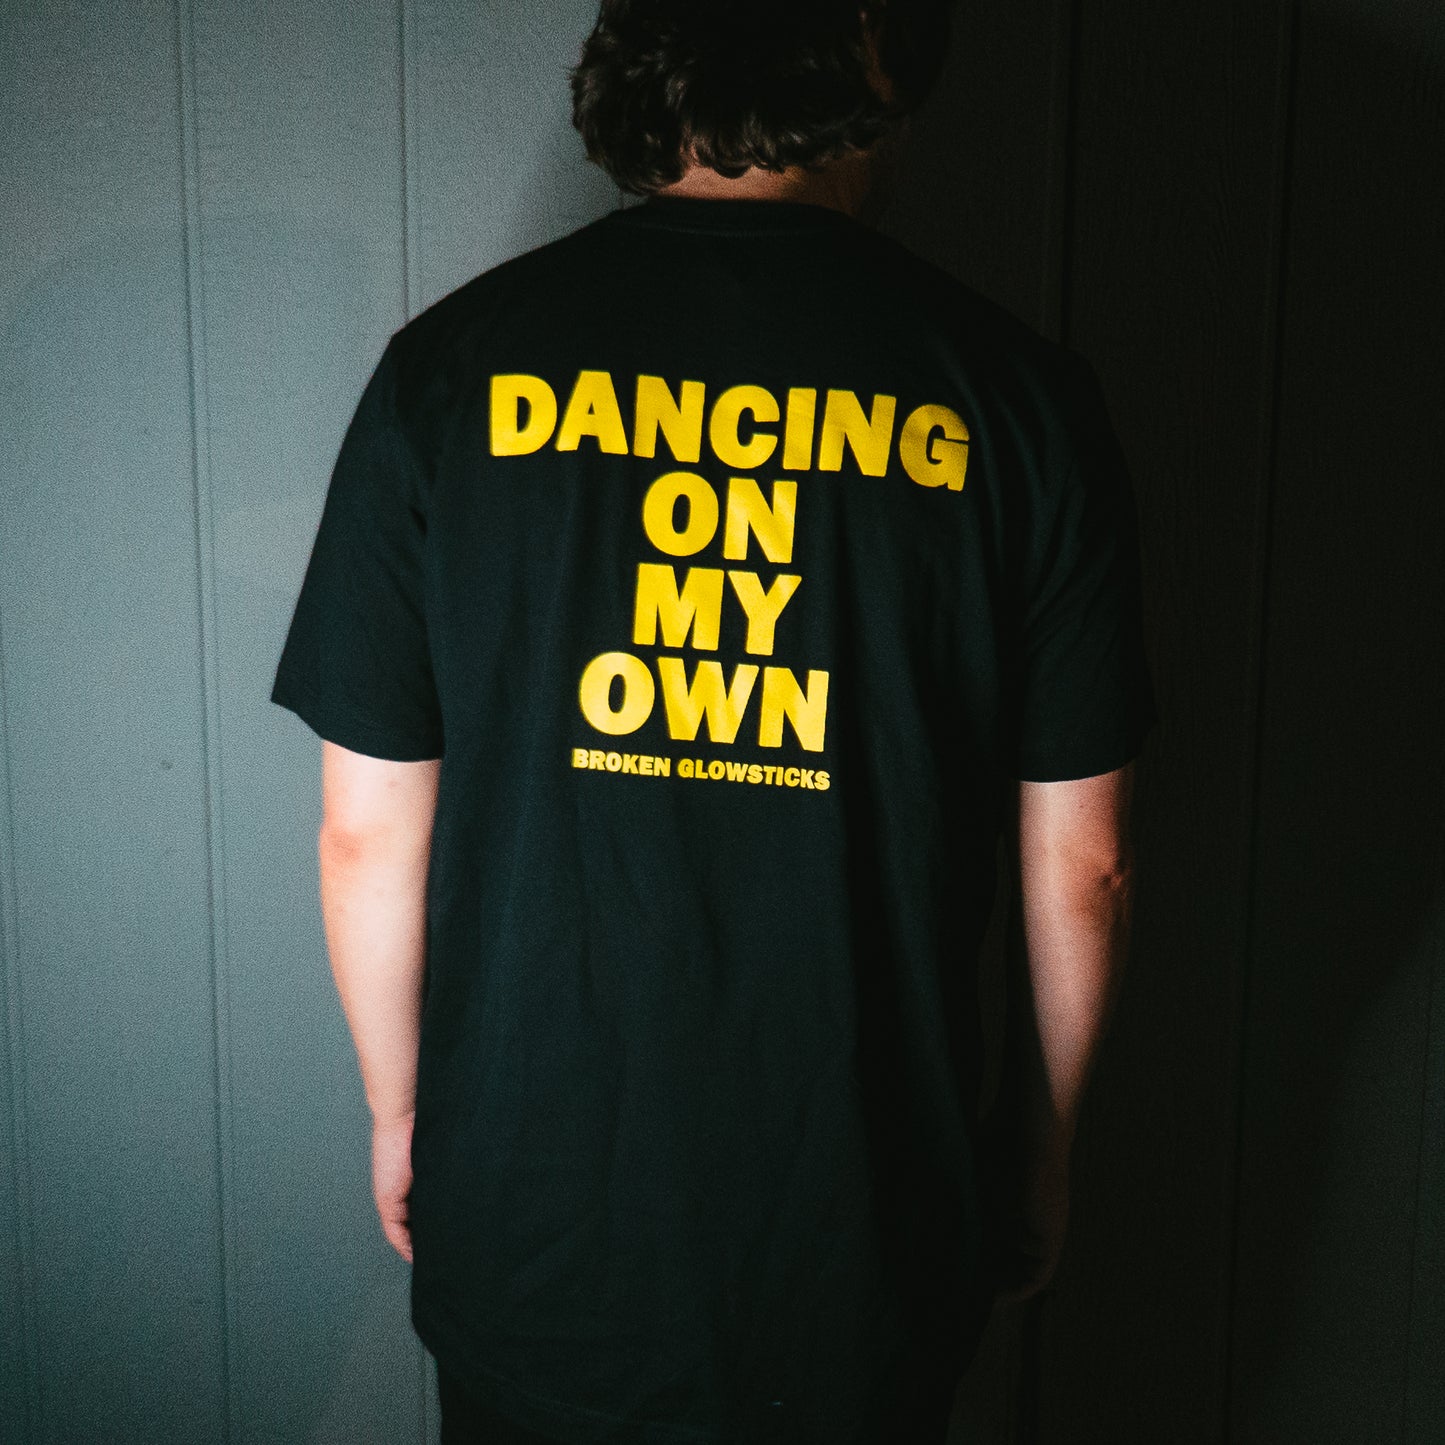 Limited Edition Dancing on my Own Shirt